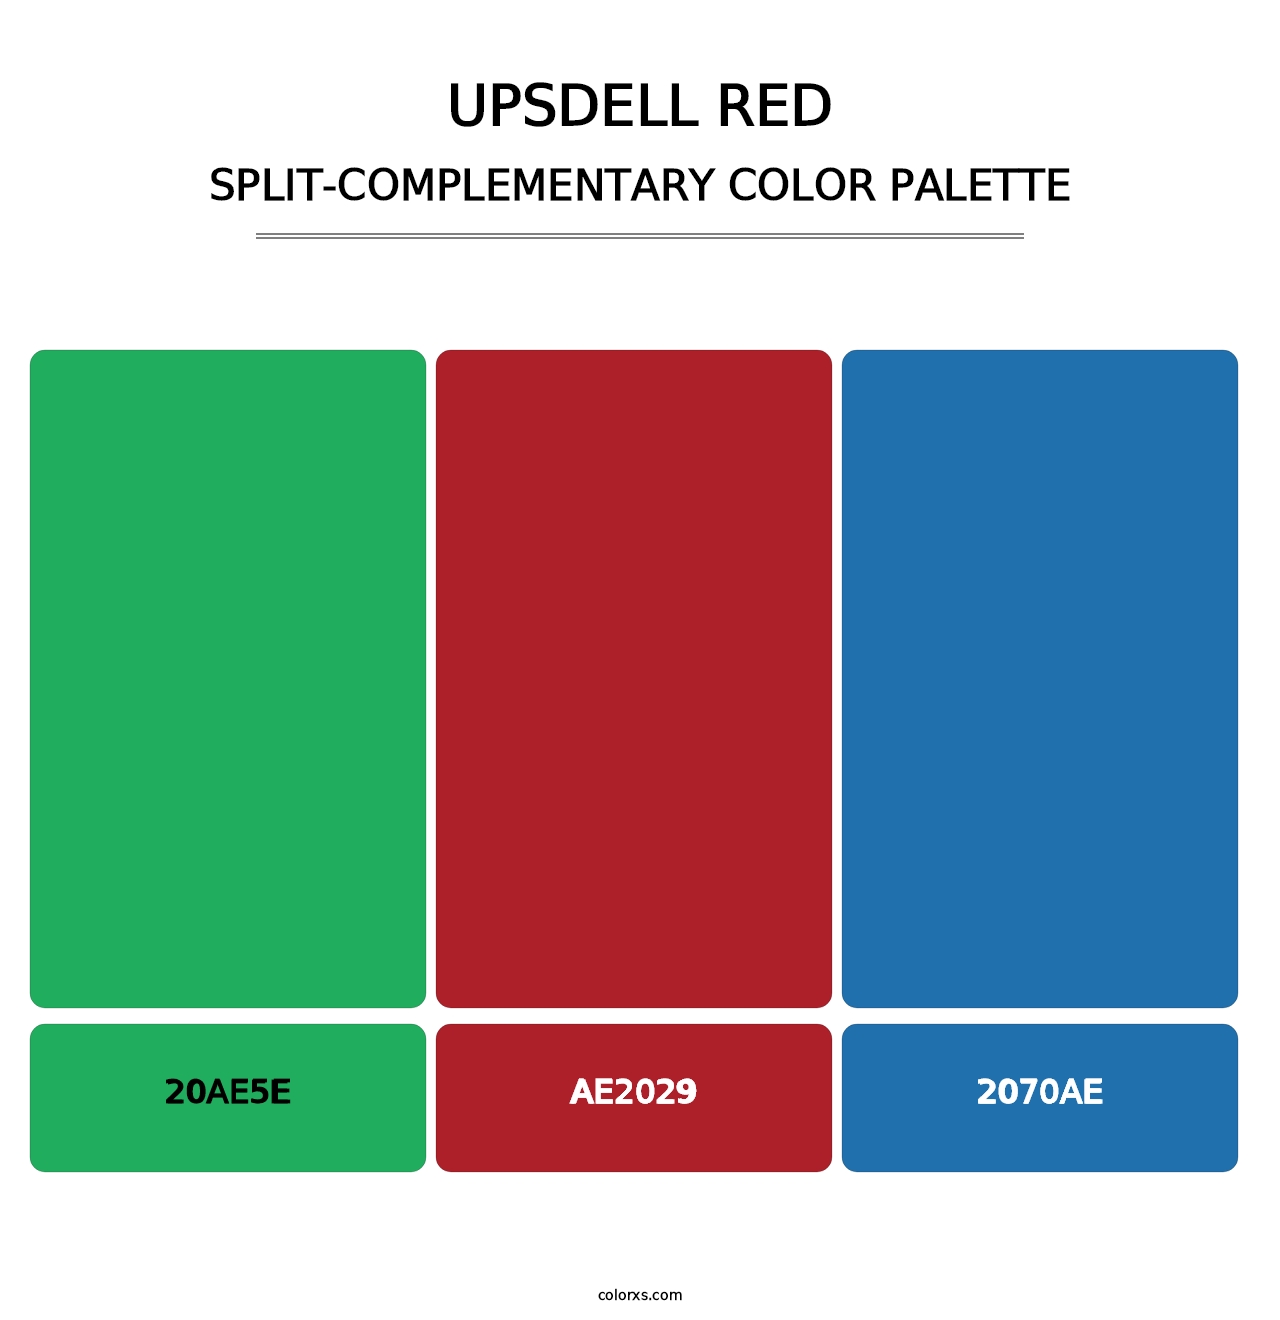 Upsdell Red - Split-Complementary Color Palette